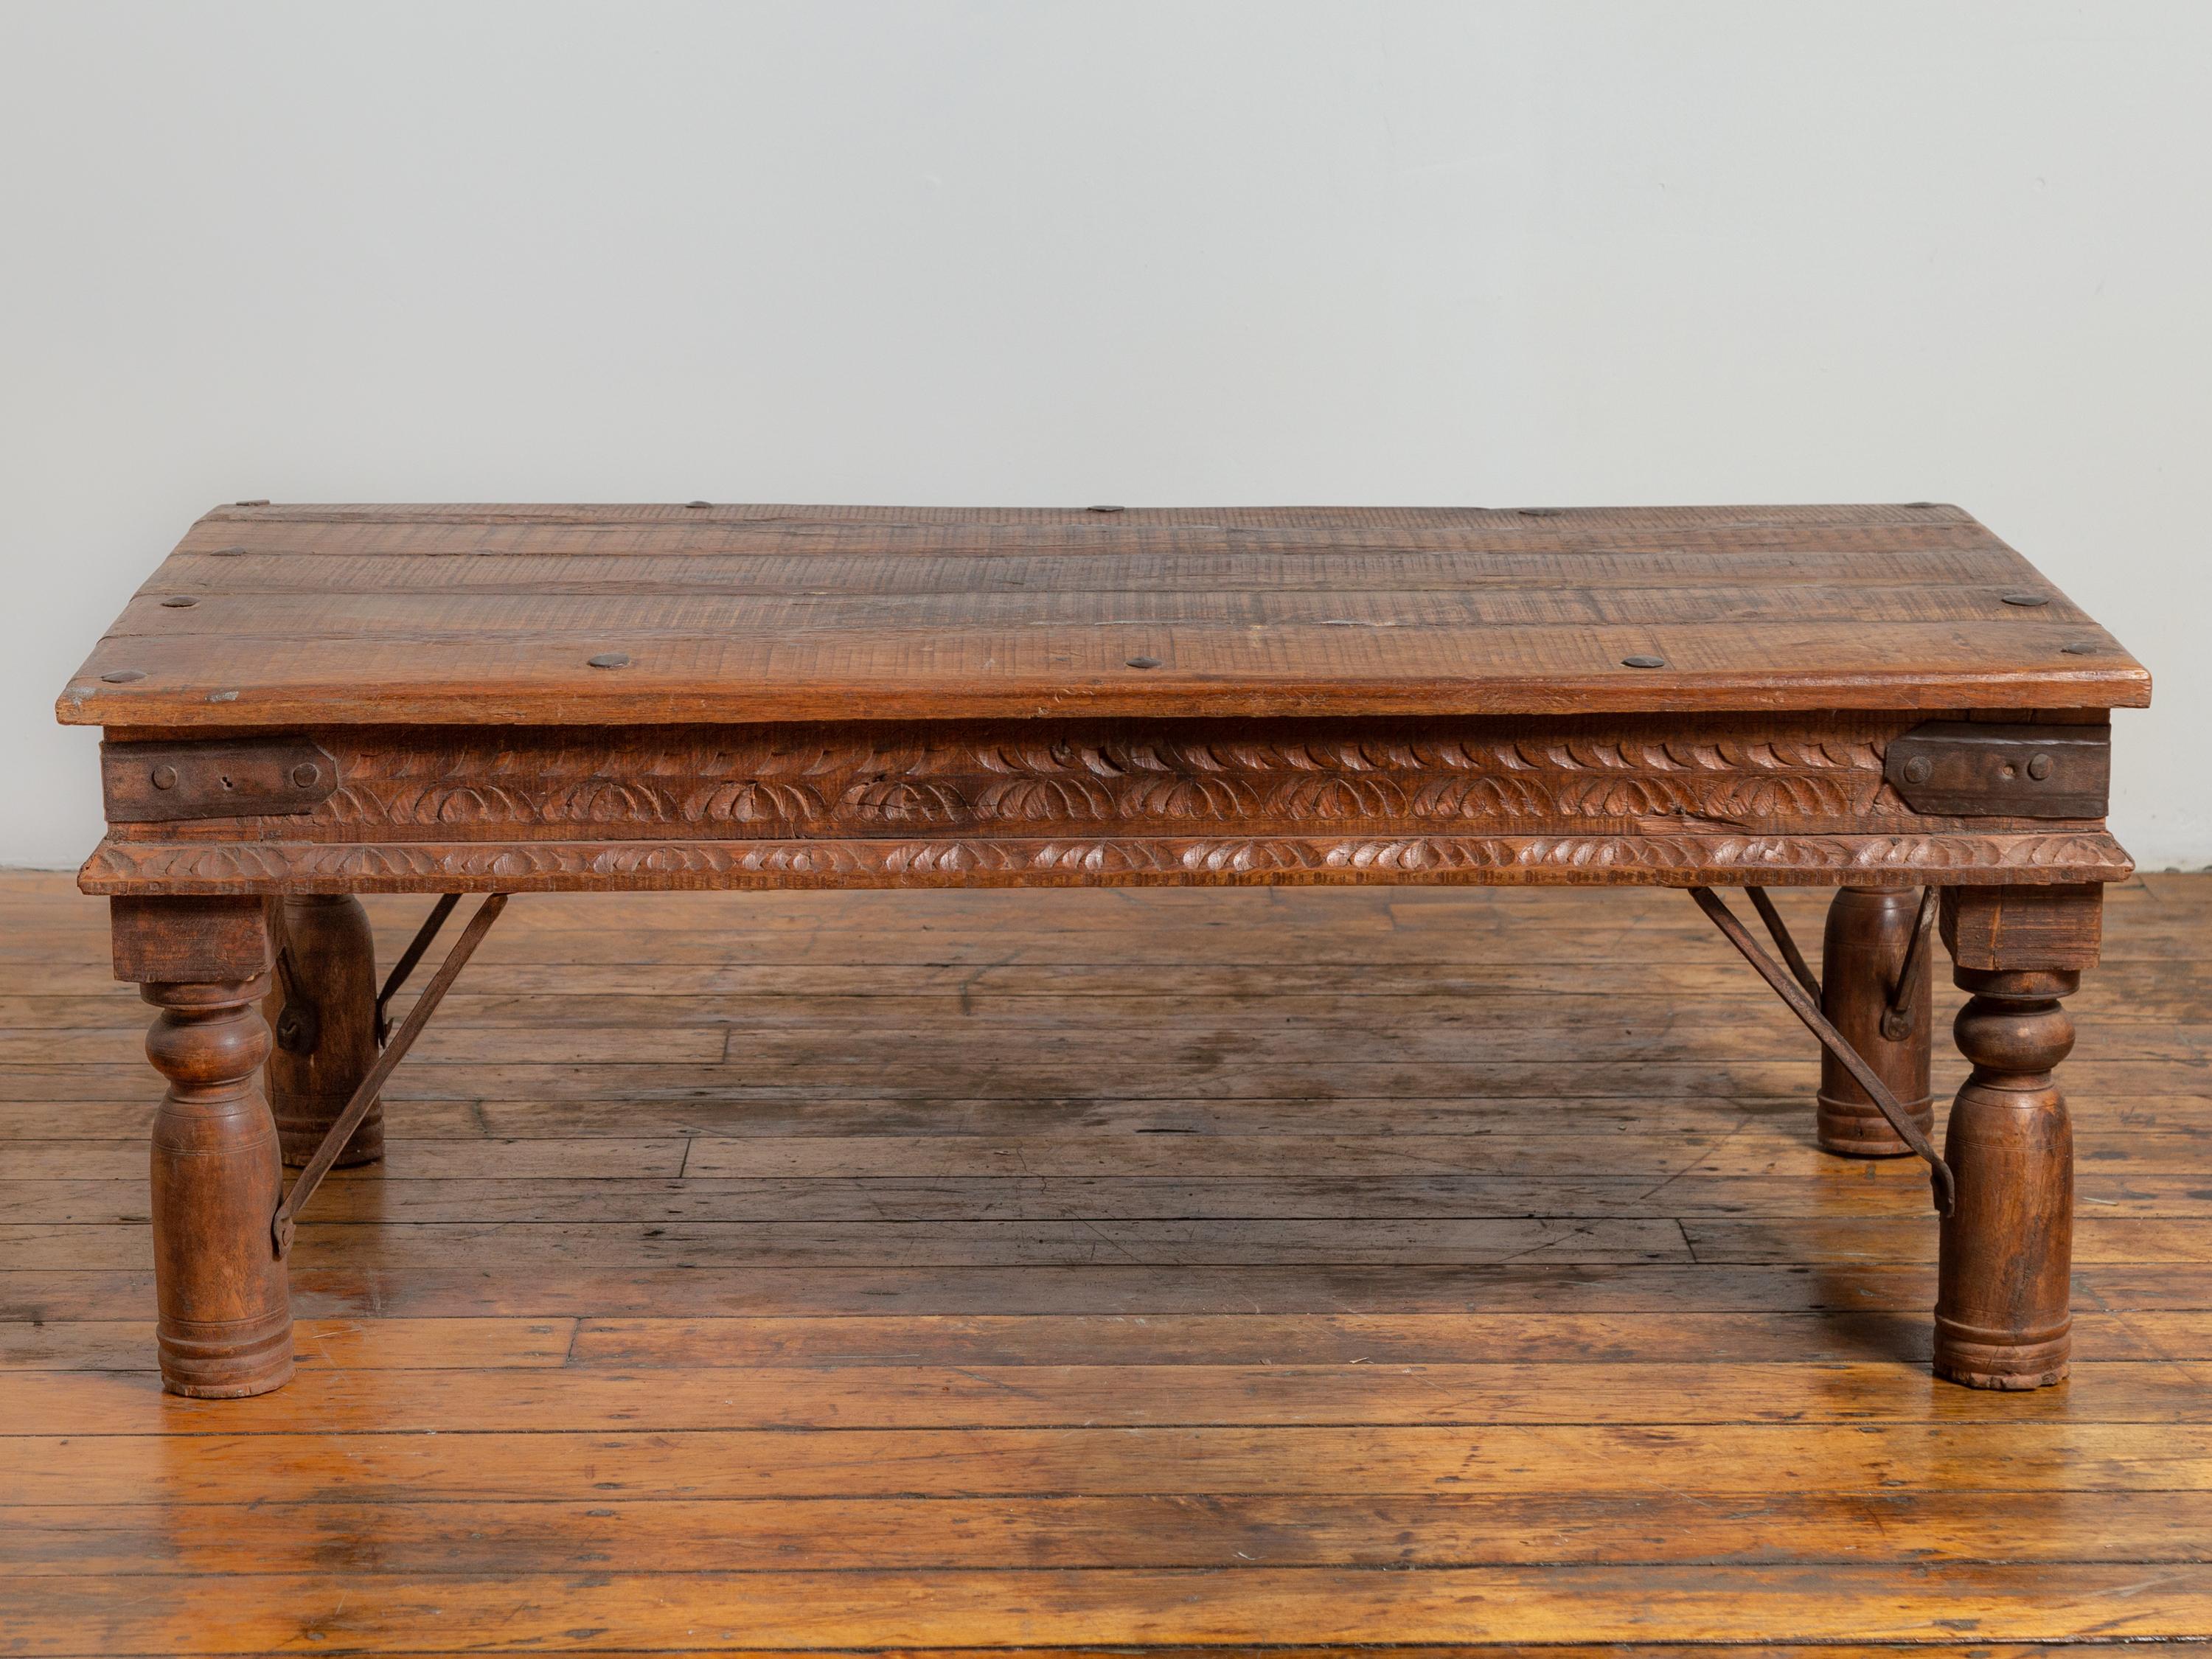 An antique rustic Indian low coffee table from the 19th century, with iron accents and baluster legs. Born in India during the 19th century this charming coffee table features a rectangular planked top with iron nailheads, sitting above an elegant